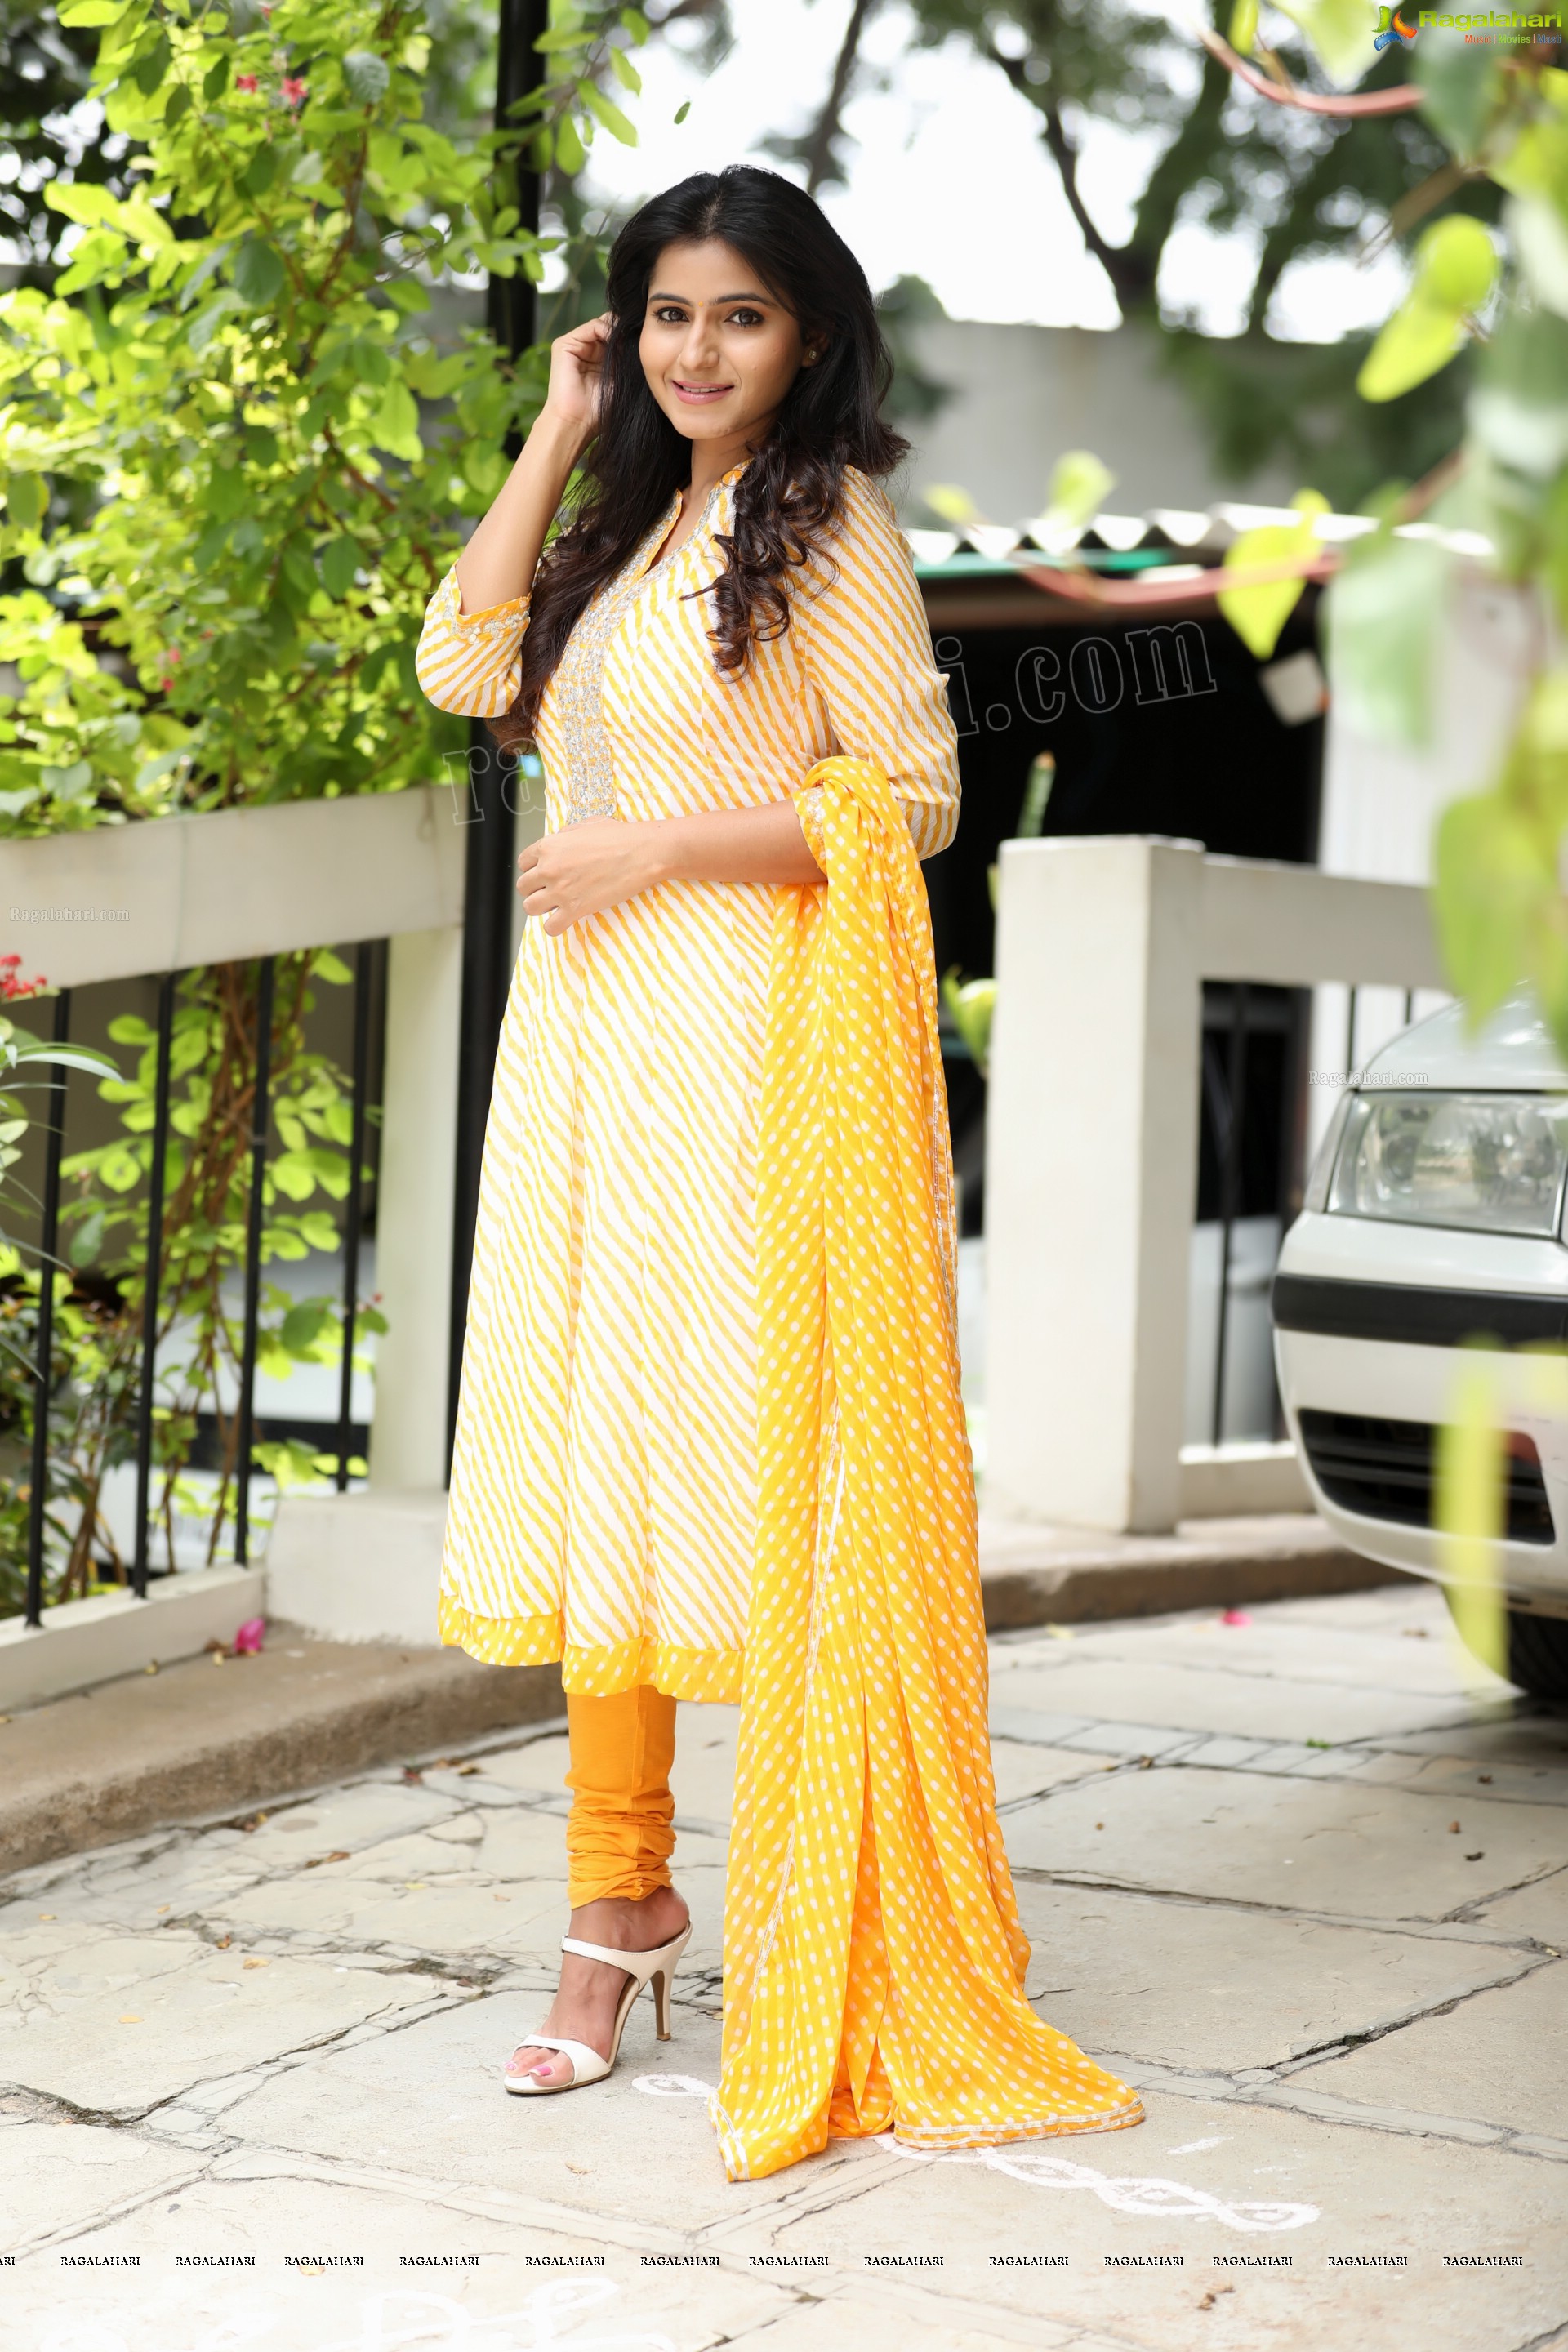 Swathi Reddy (Exclusive Photo Shoot) (High Definition Photos)